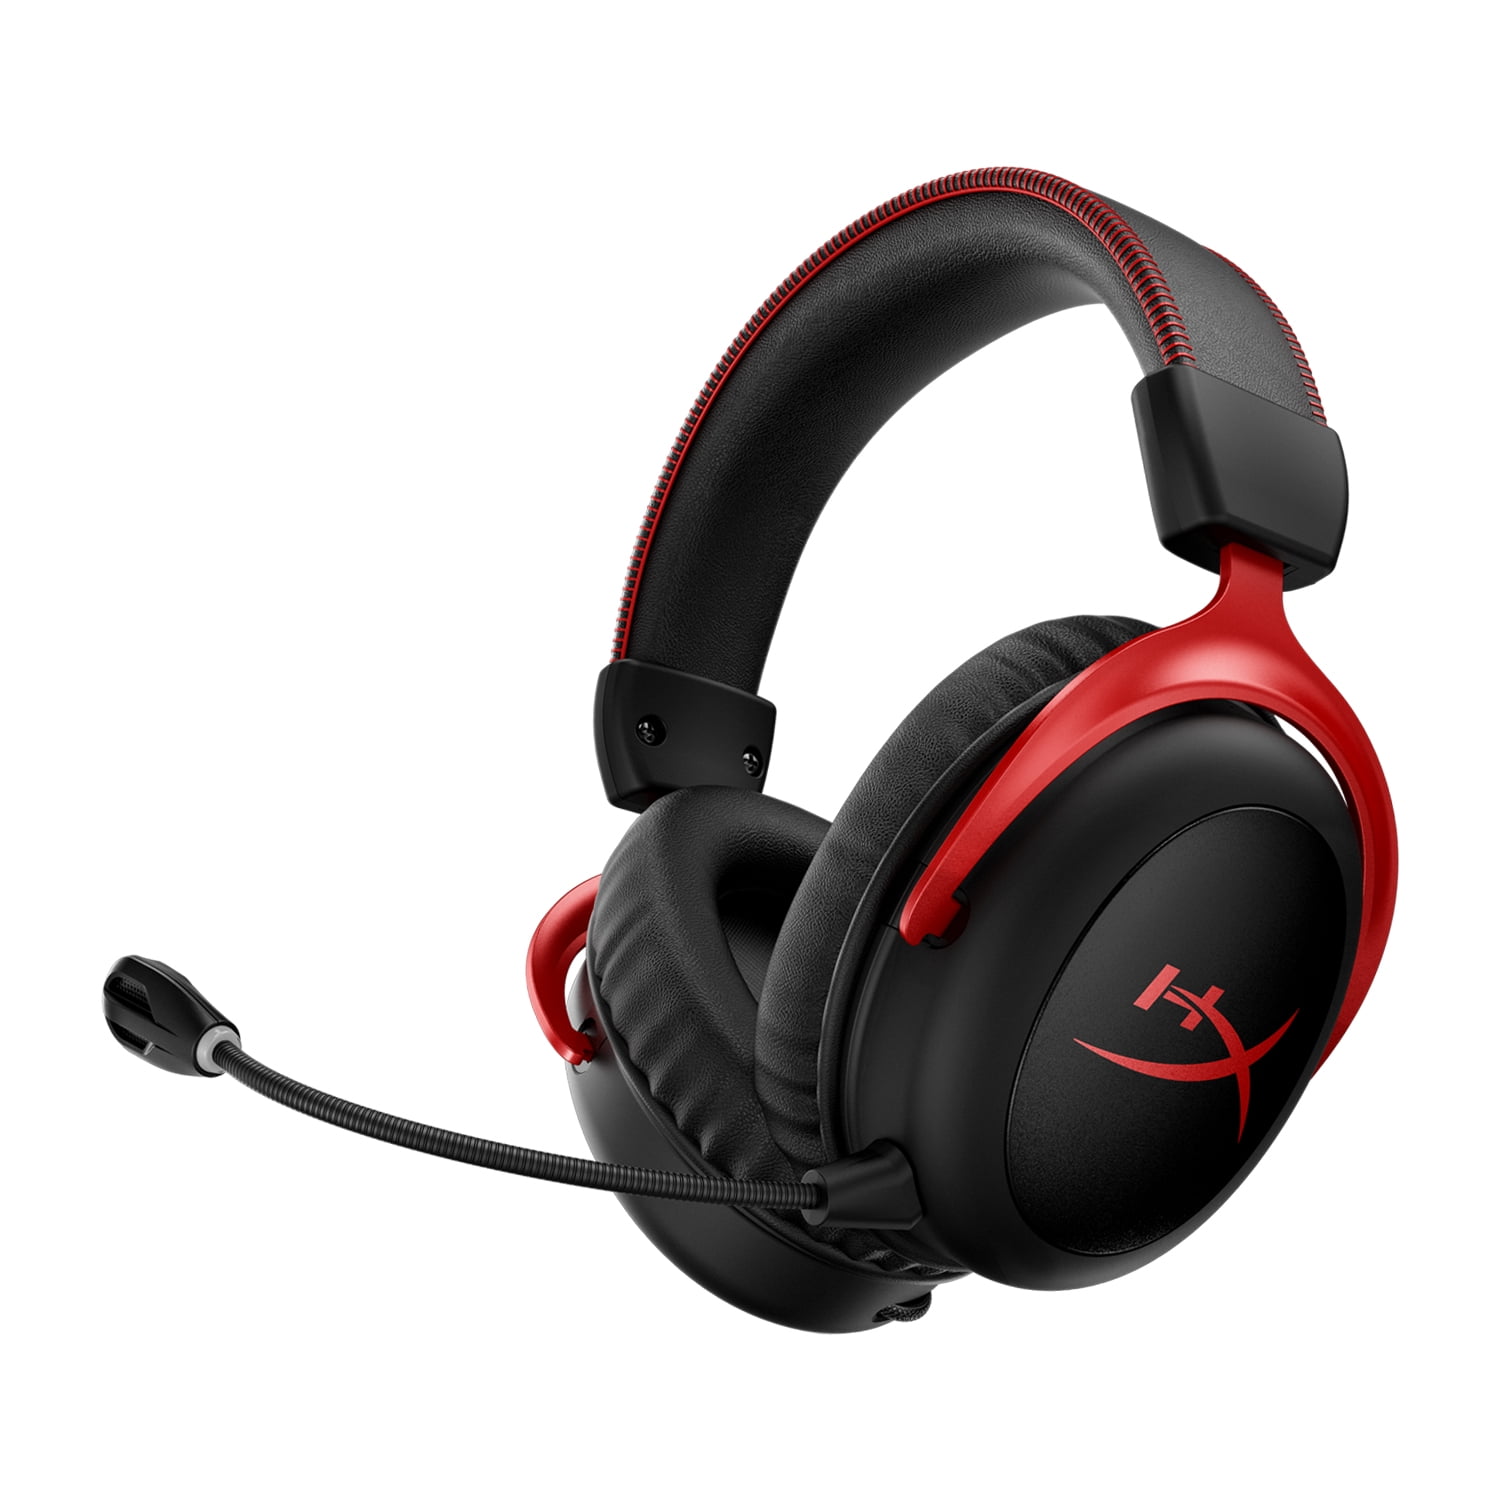 HyperX Cloud II Wireless - Gaming Headset for PC, PS4, Nintendo Switch,  Long Lasting Battery Up to 30 Hours, 7.1 Surround Sound, Memory Foam, 